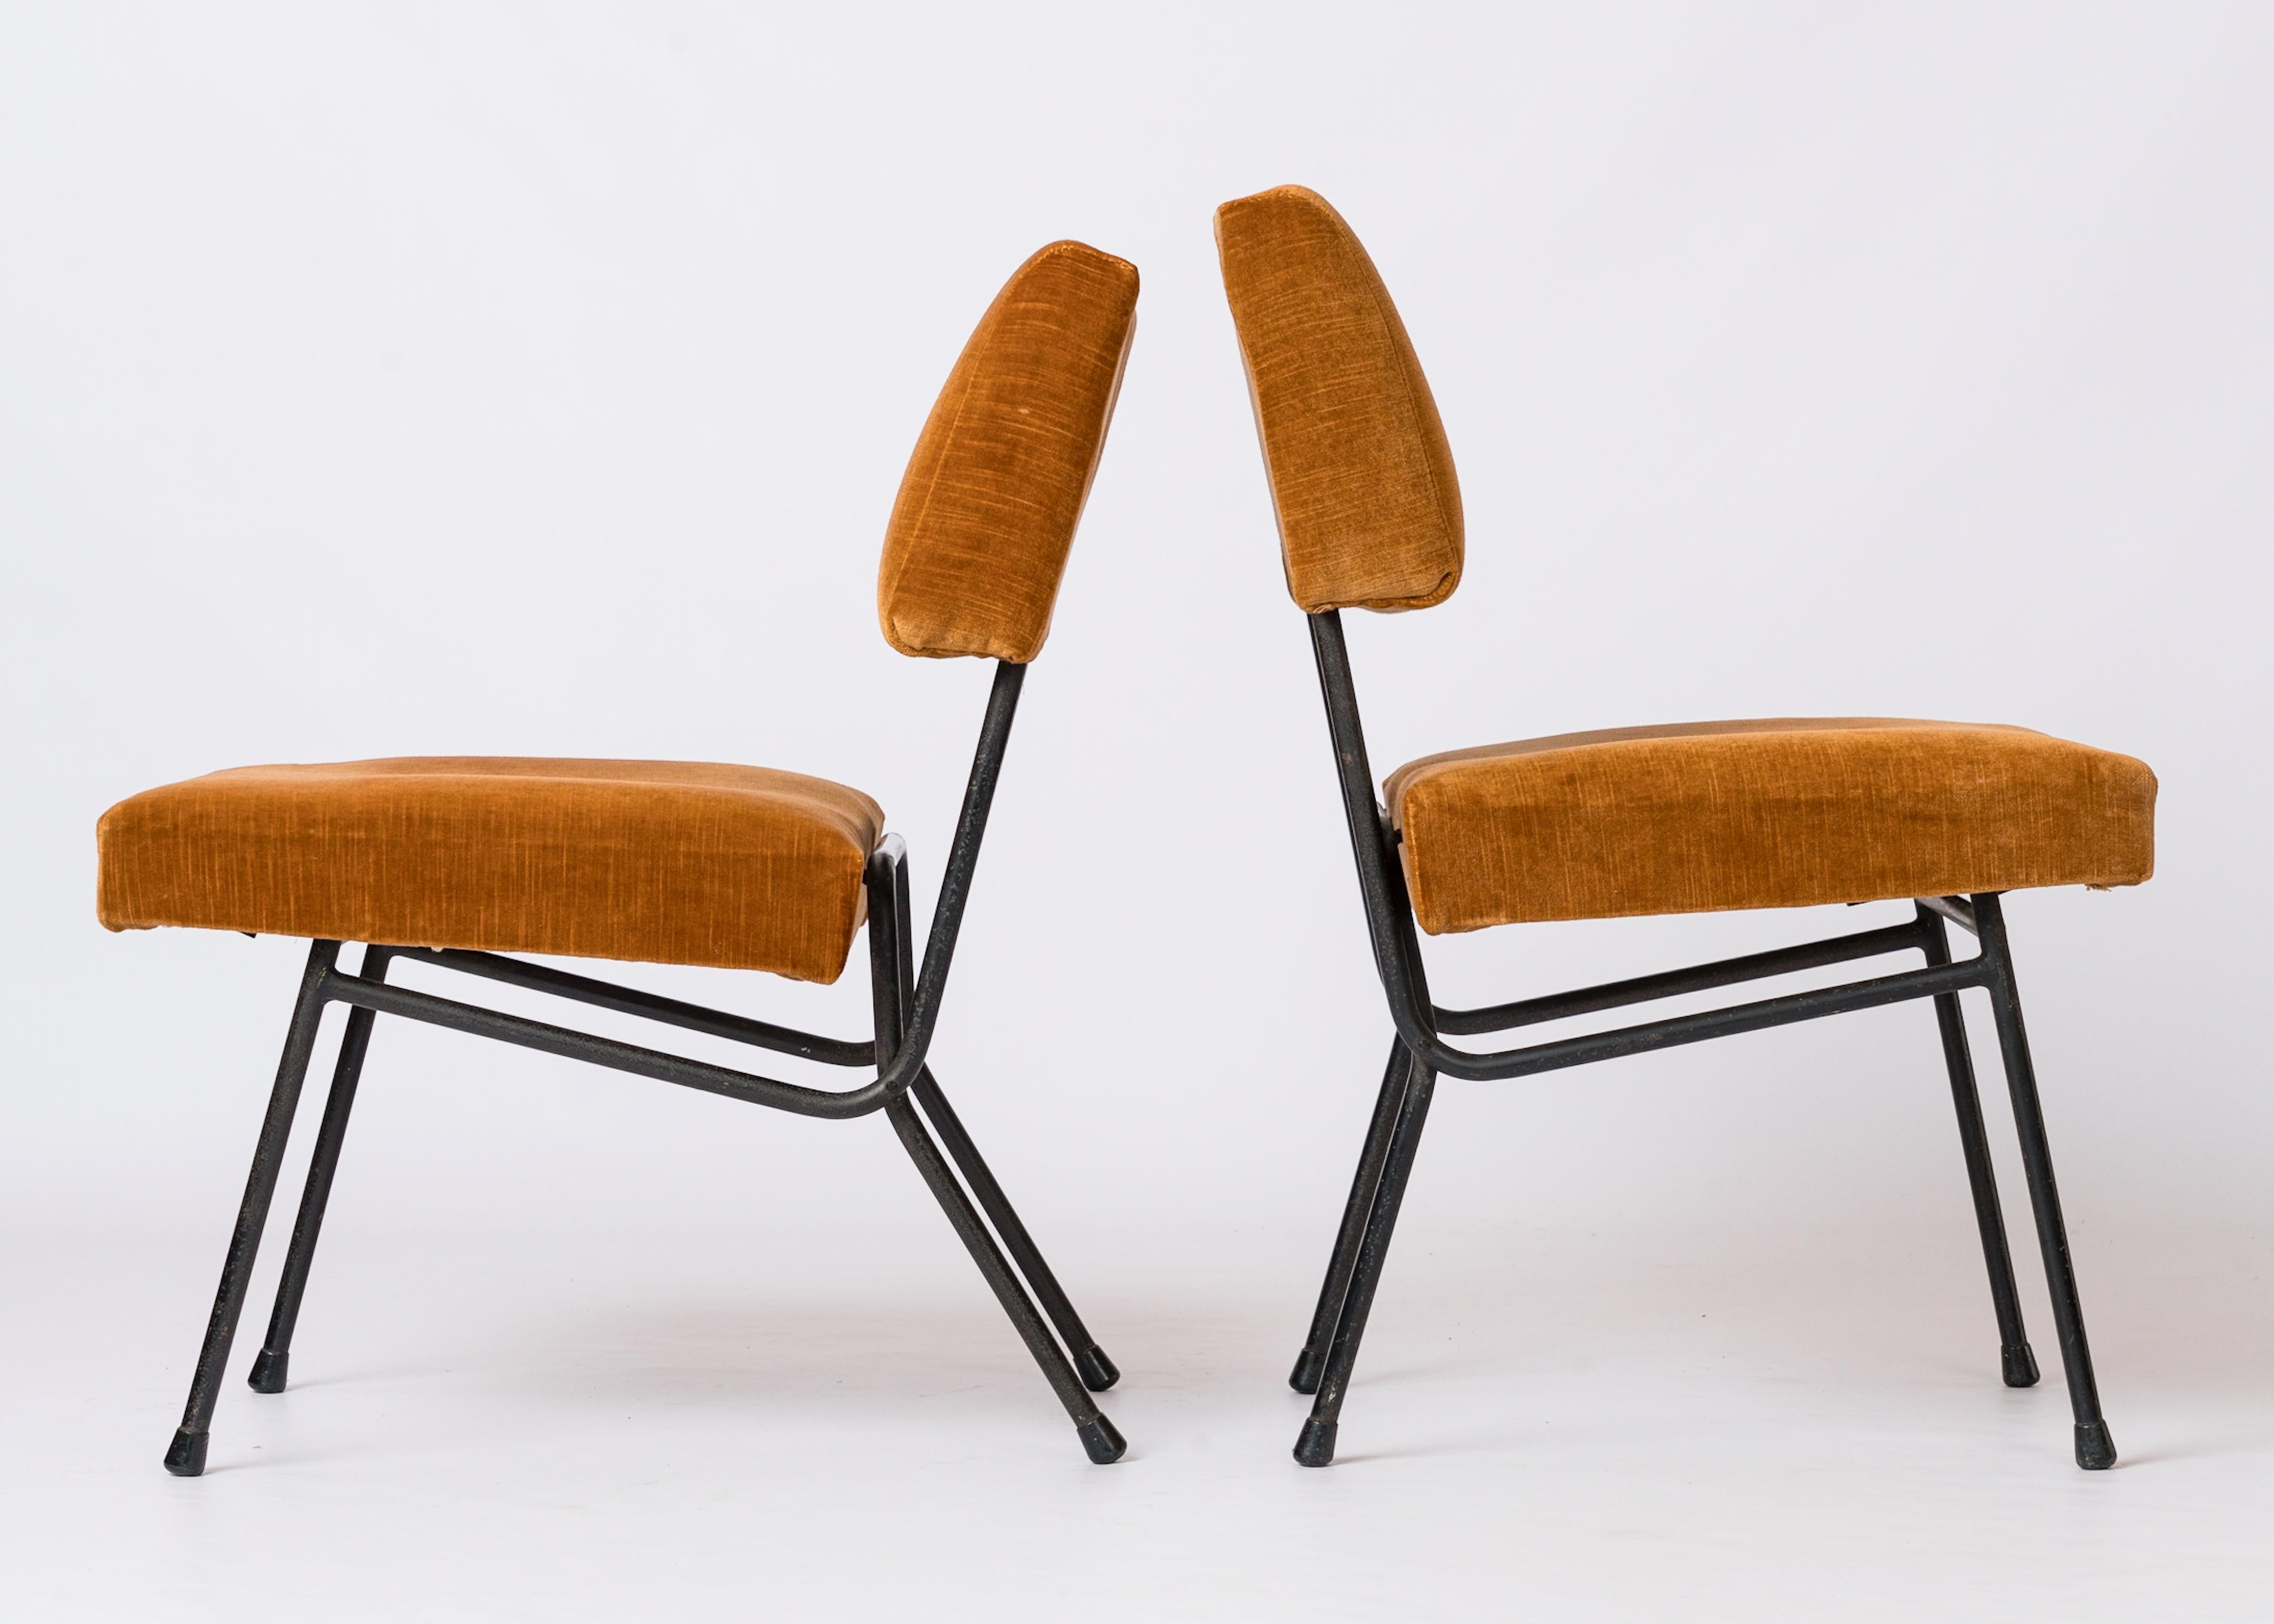 Mid-20th Century Pair of Marigold Velvet Adjustable Chairs att. Pierre Guariche - France 1960's For Sale